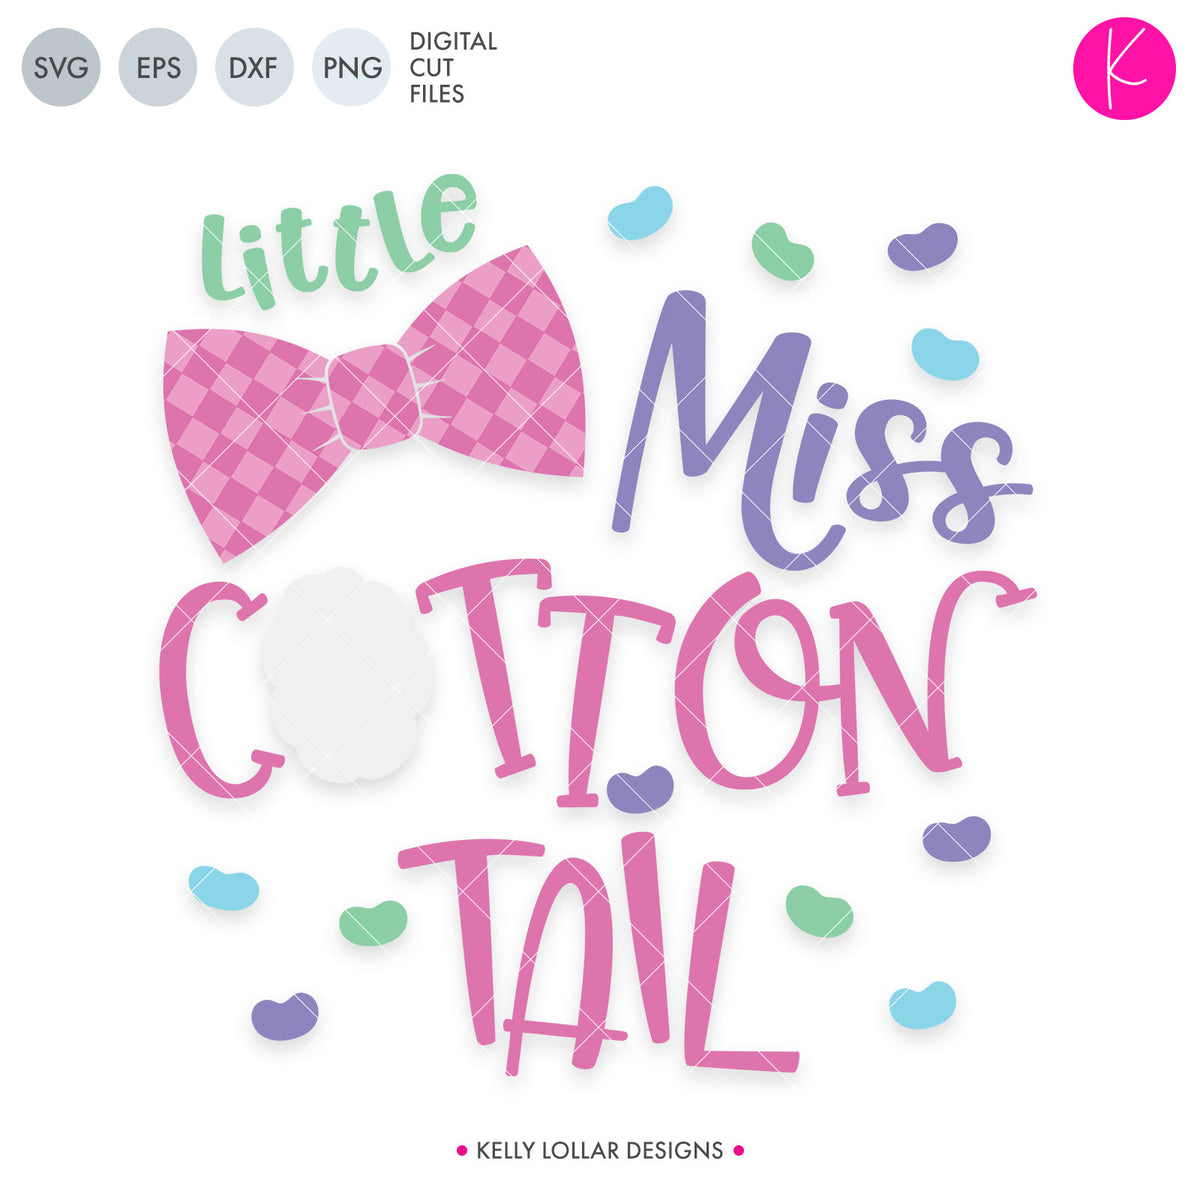 Little Miss Cottontail | SVG DXF EPS PNG Cut Files